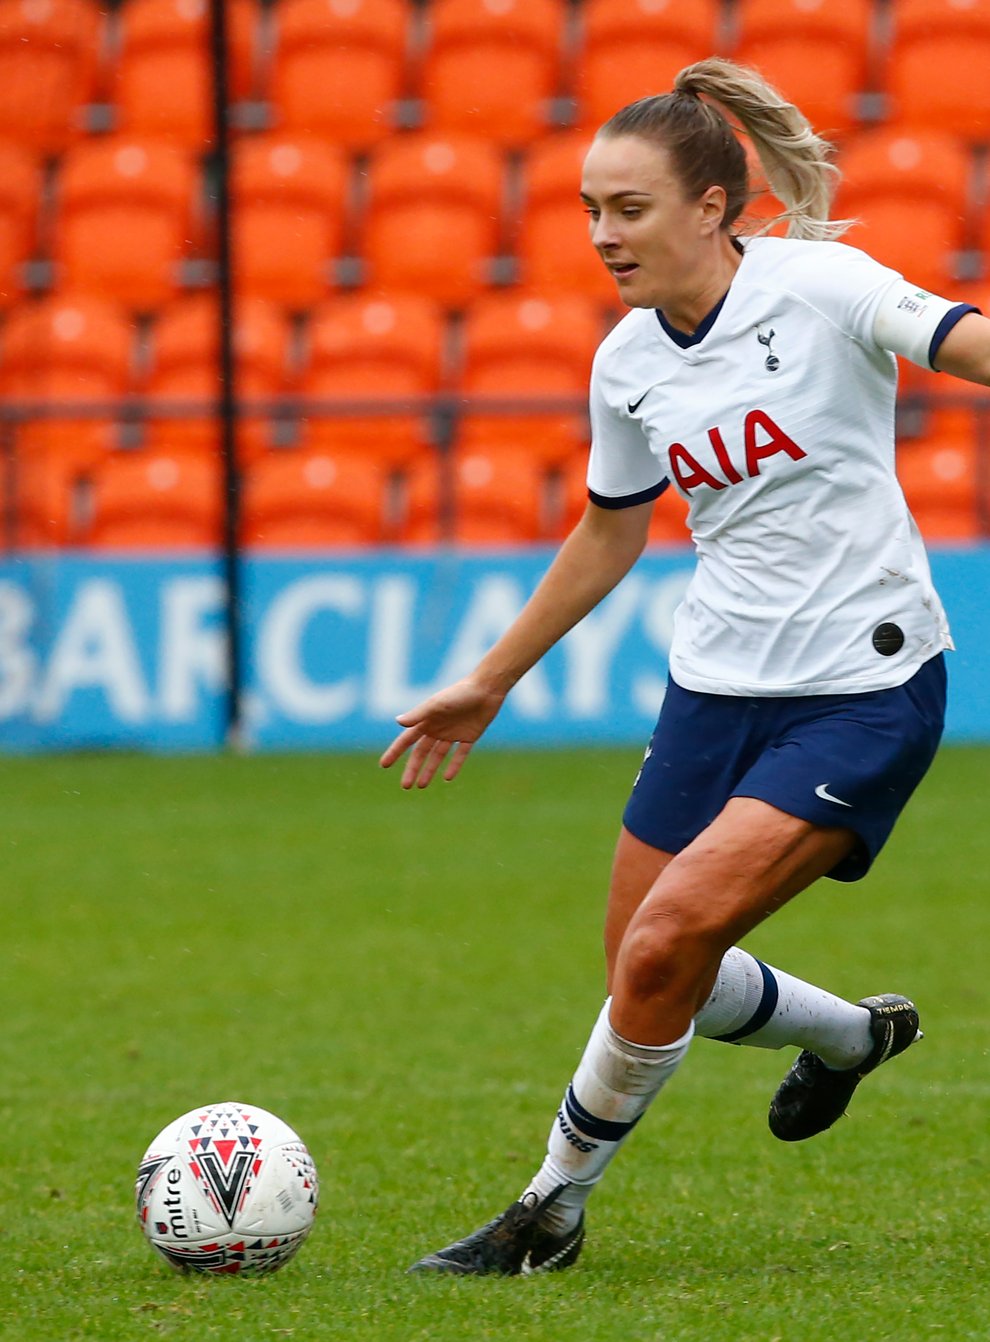 Spur are still searching for their first WSL win of the season